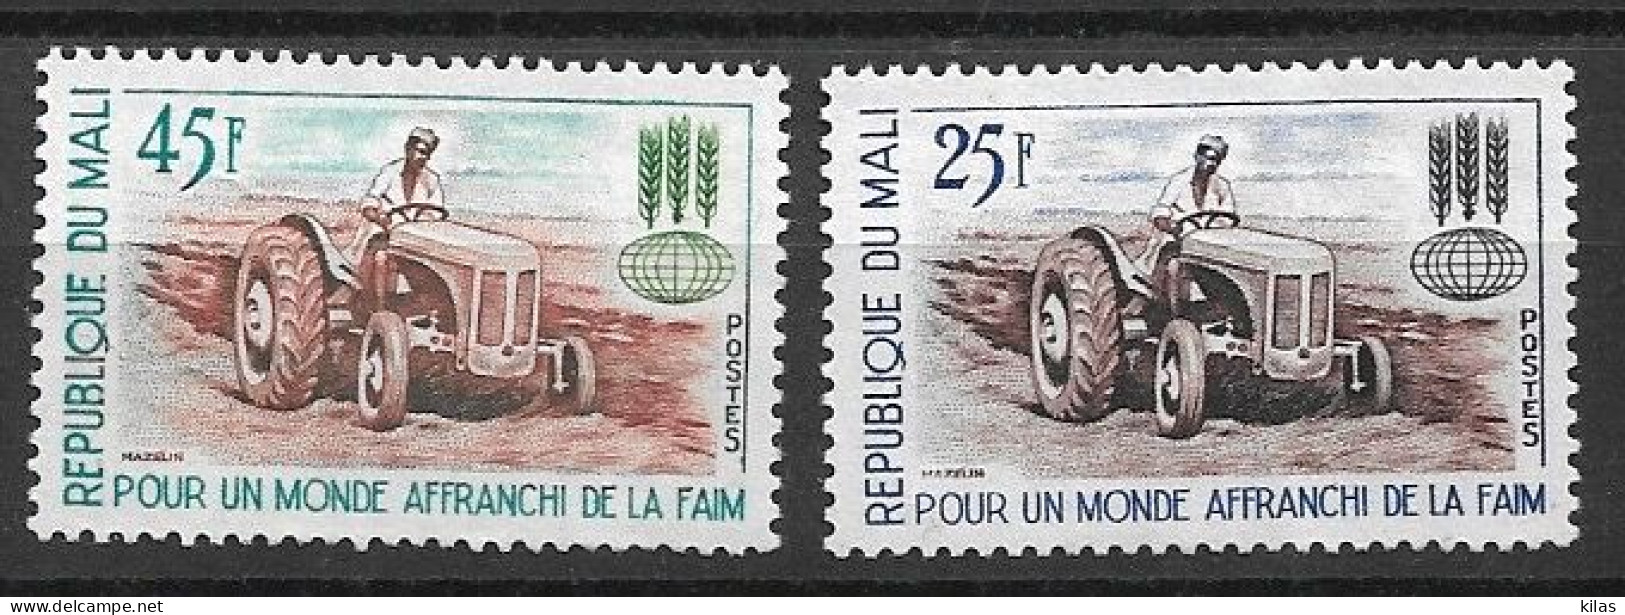 MALI 1963 FREEDOM FROM HUNGER MNH - Food